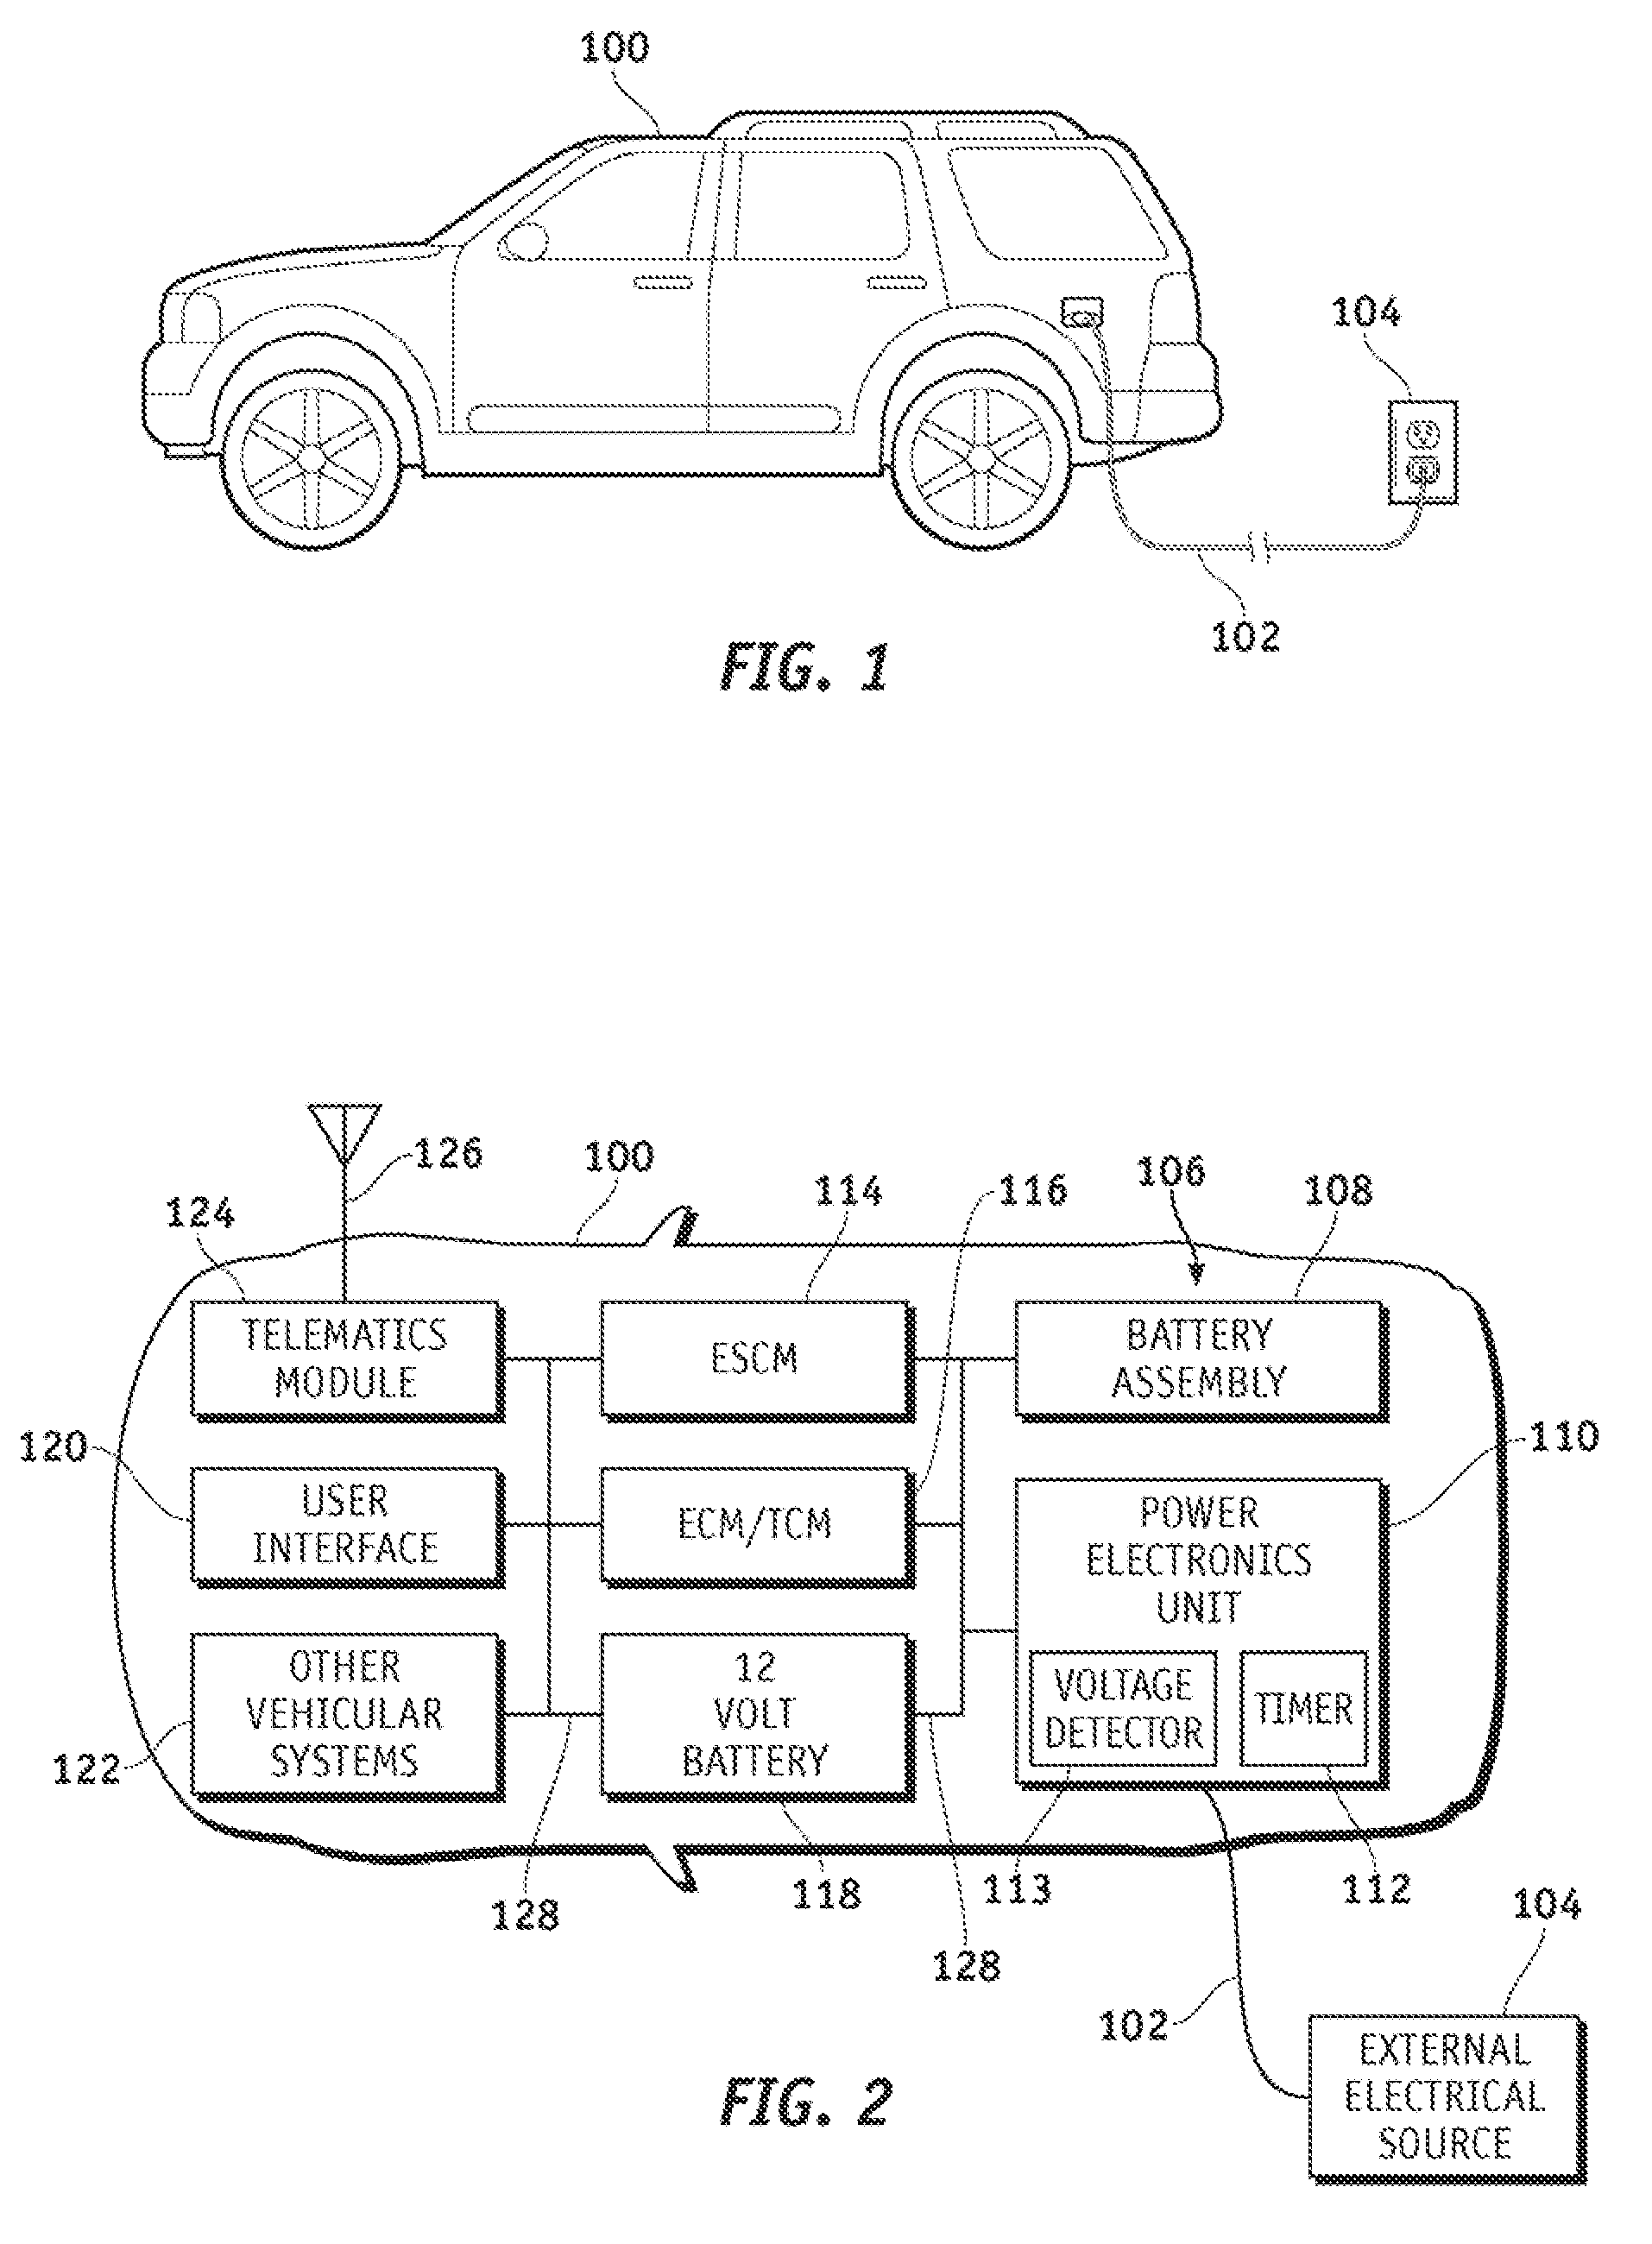 System and method for optimizing grid charging of an electric/hybrid vehicle